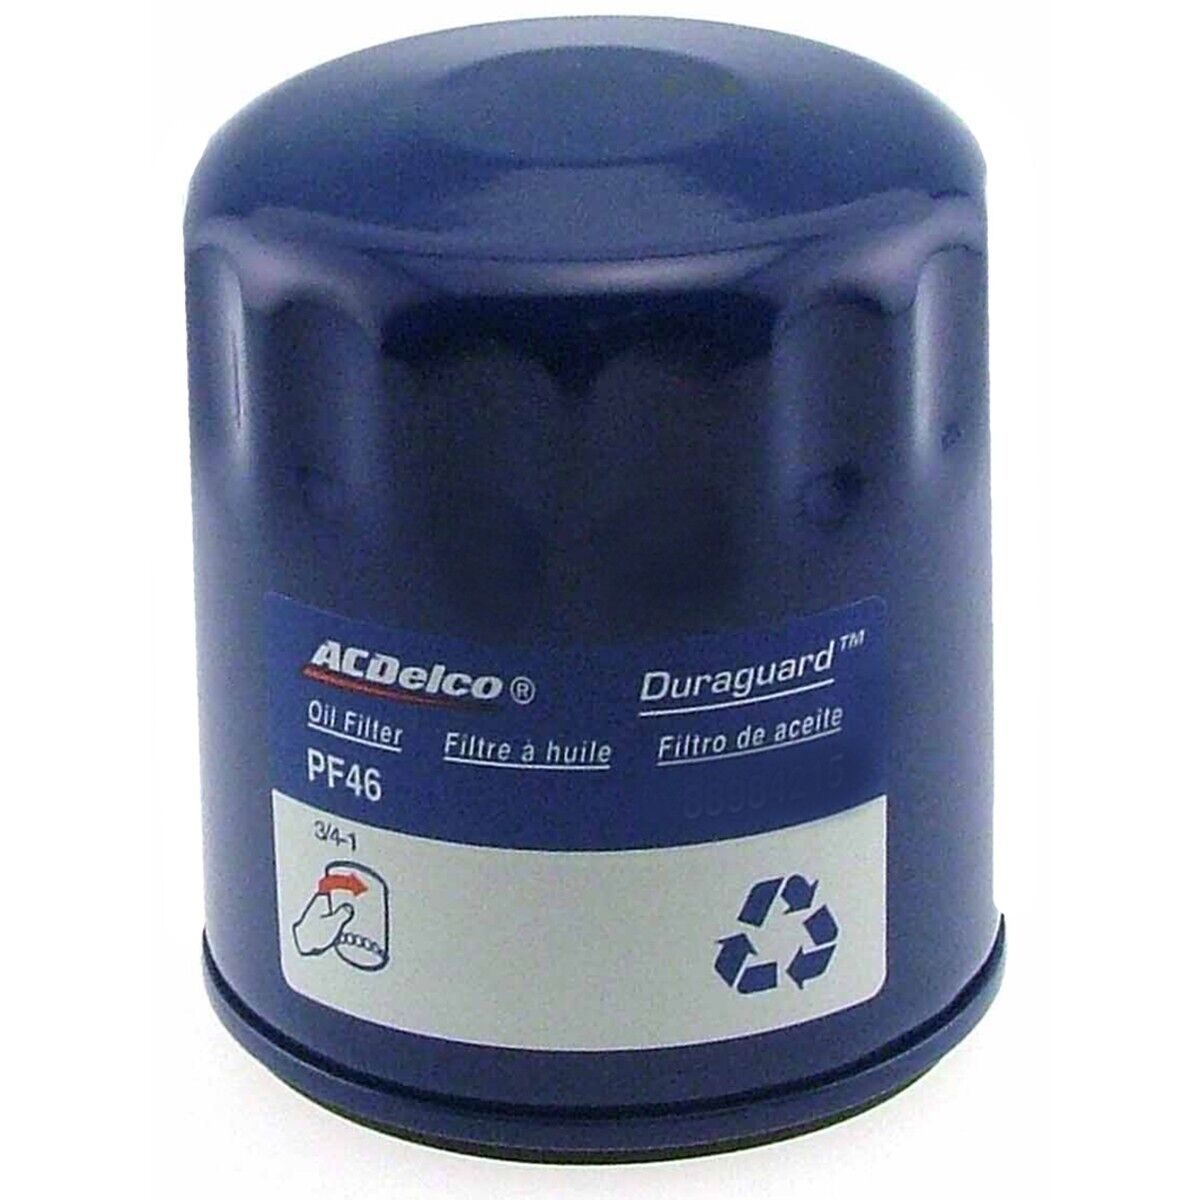 PF46E AC Delco Oil Filter for Chevy Olds Le Sabre Avalanche Express Van Suburban